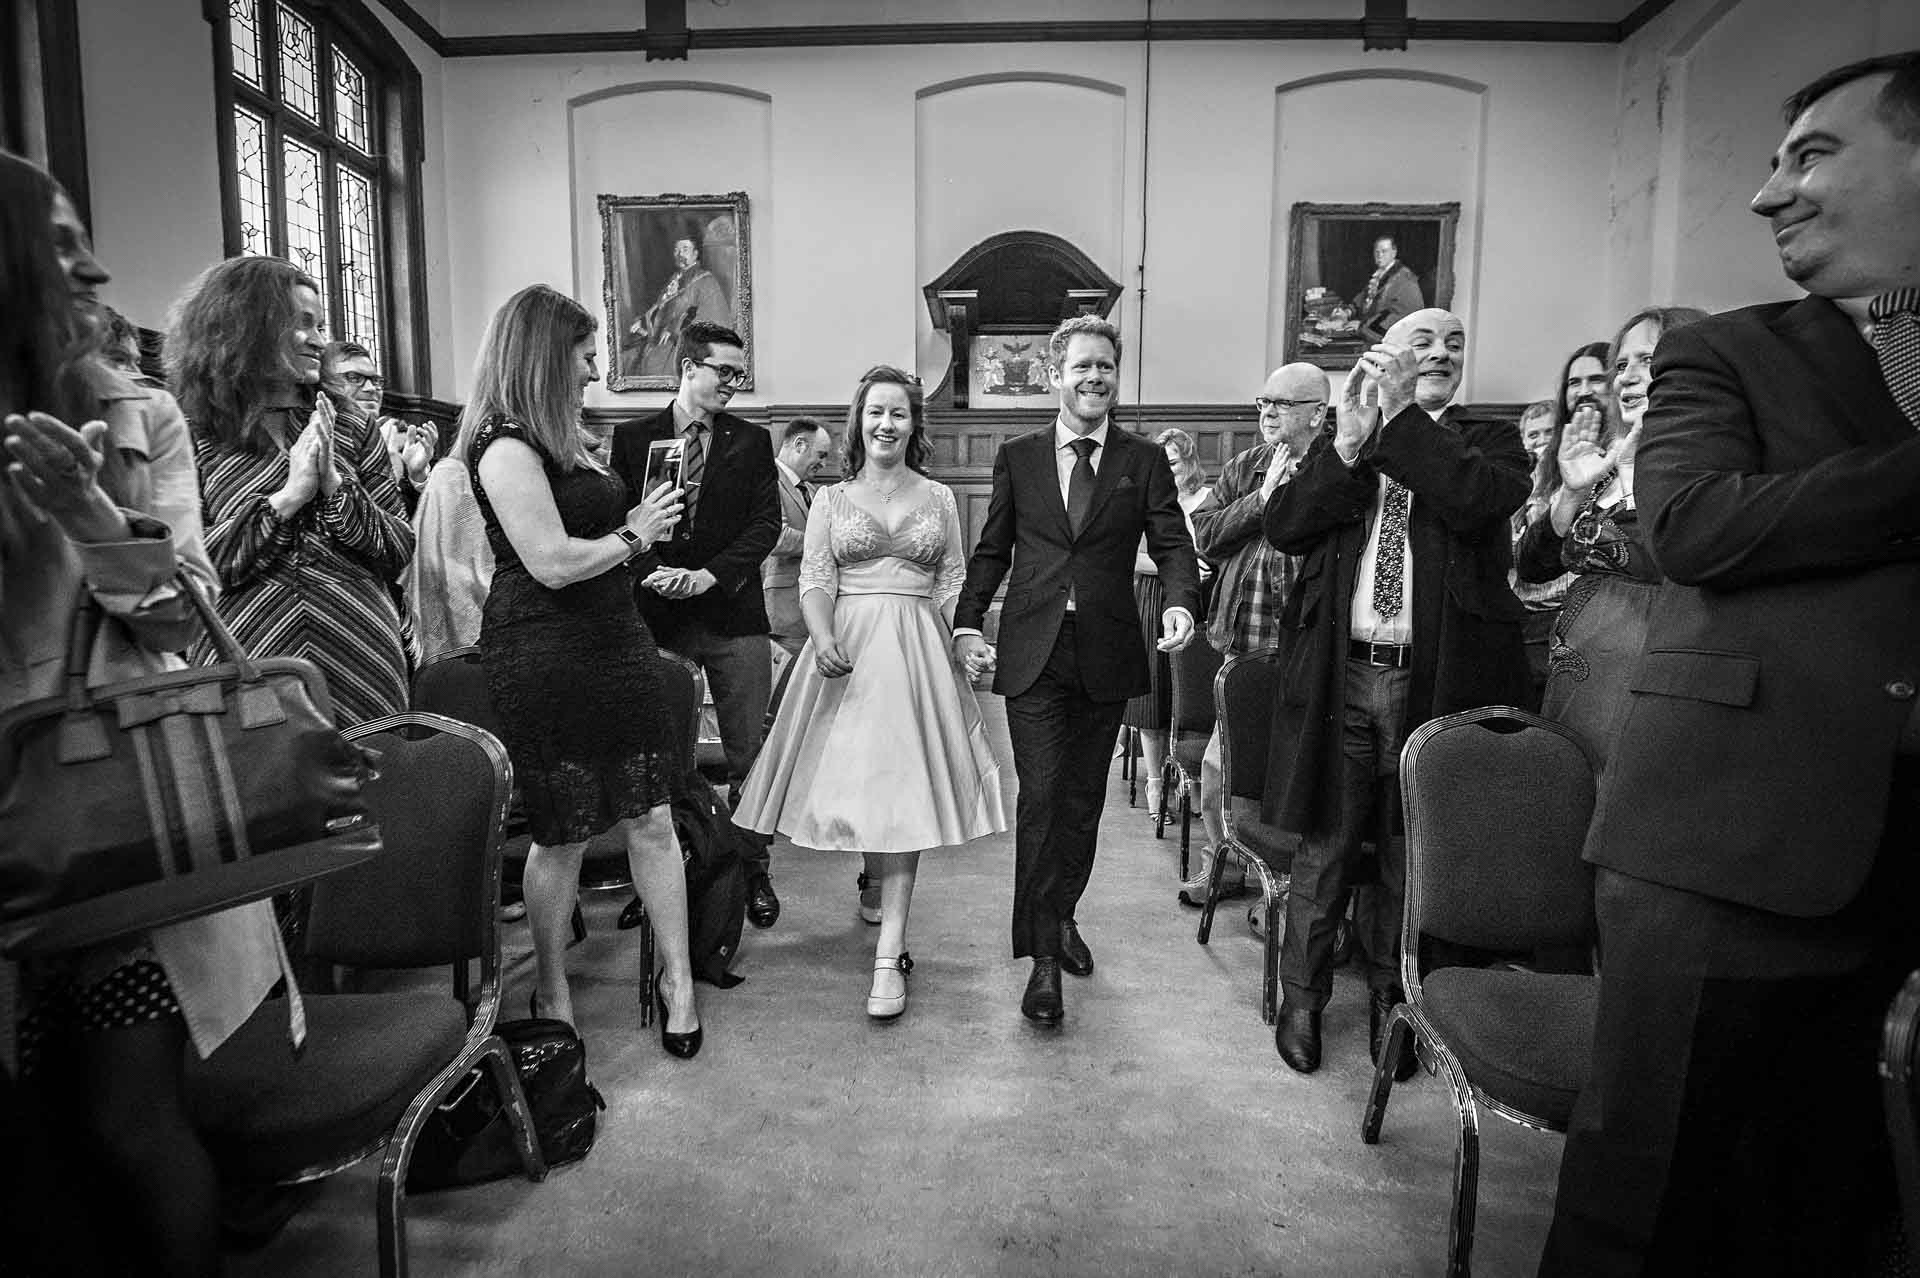 Chiswick Town Hall Wedding Photography - Bride and Groom Walk Down the Aisle